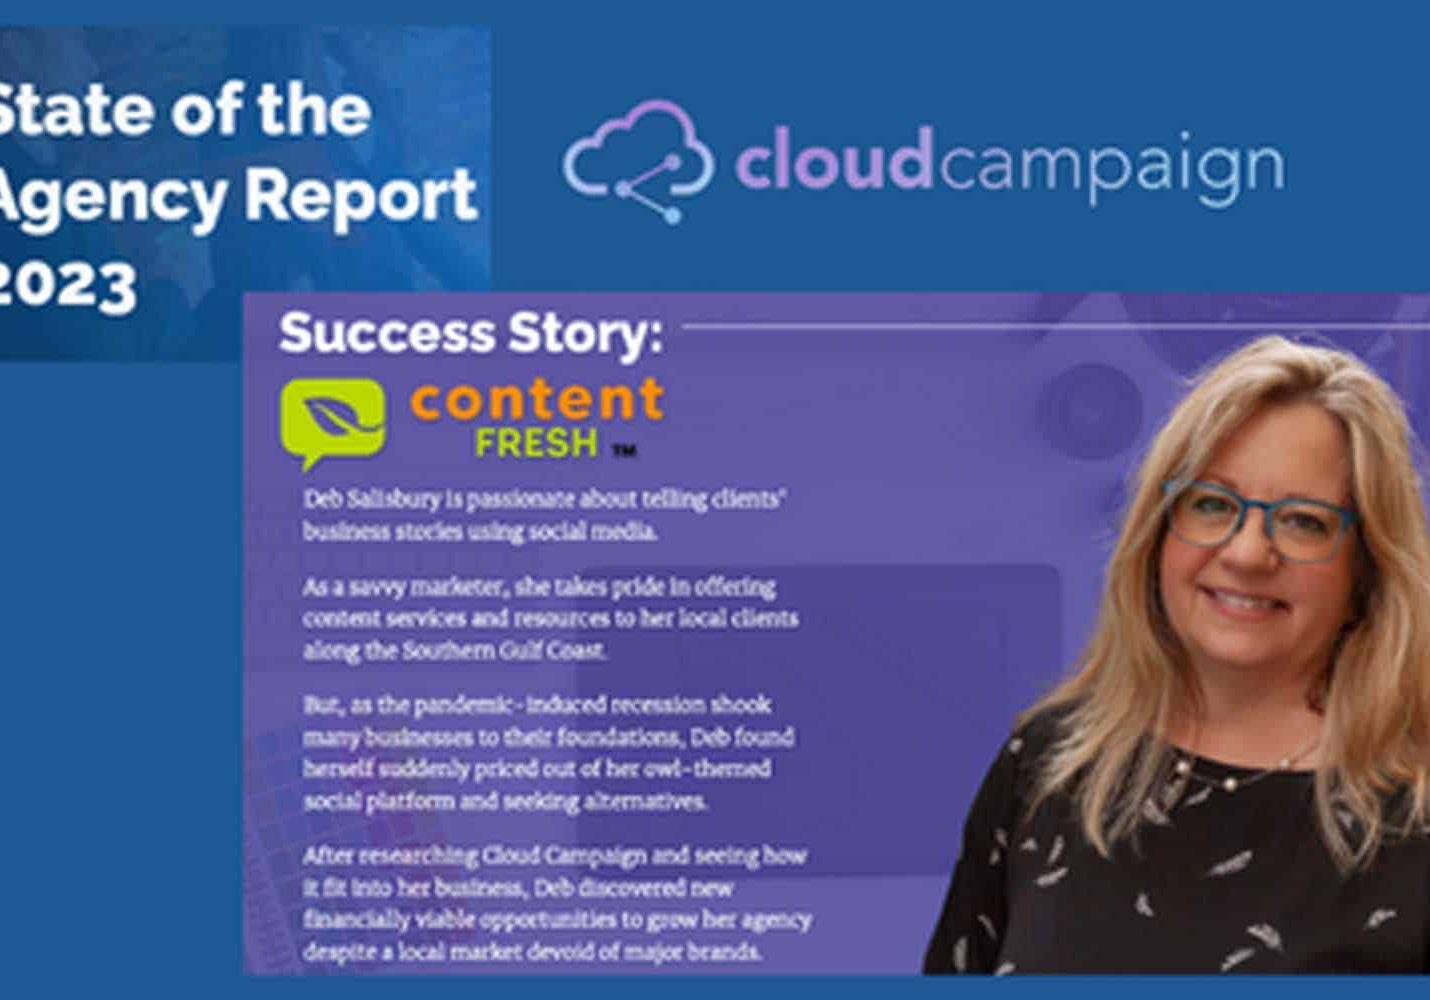 Local Social Media Tool Highlighted In Success Story Report